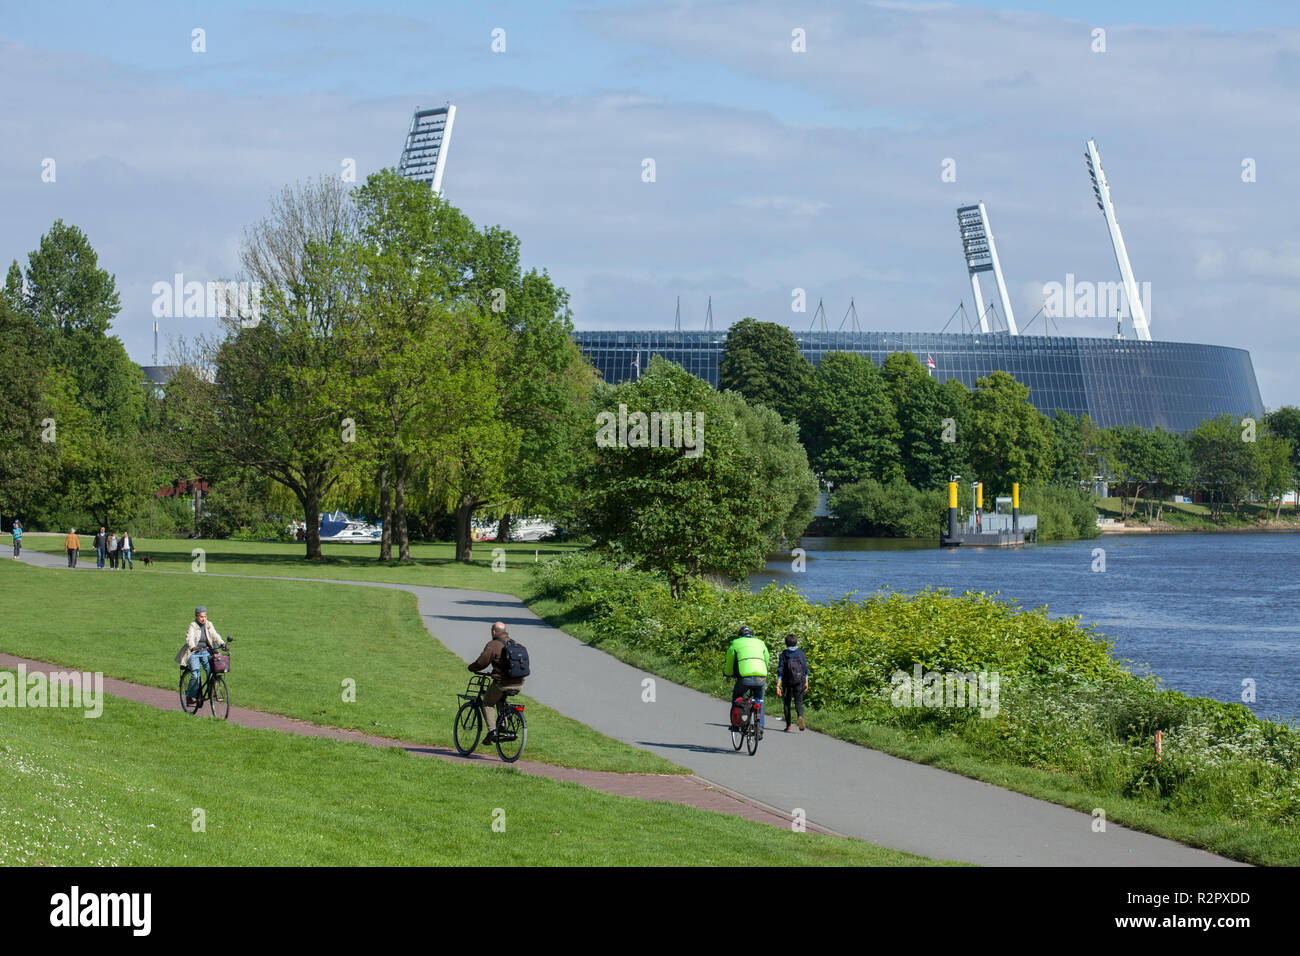 Weserstadion' football stadium with Weser River and cycle path, Bremen, Germany, Europe Stock Photo